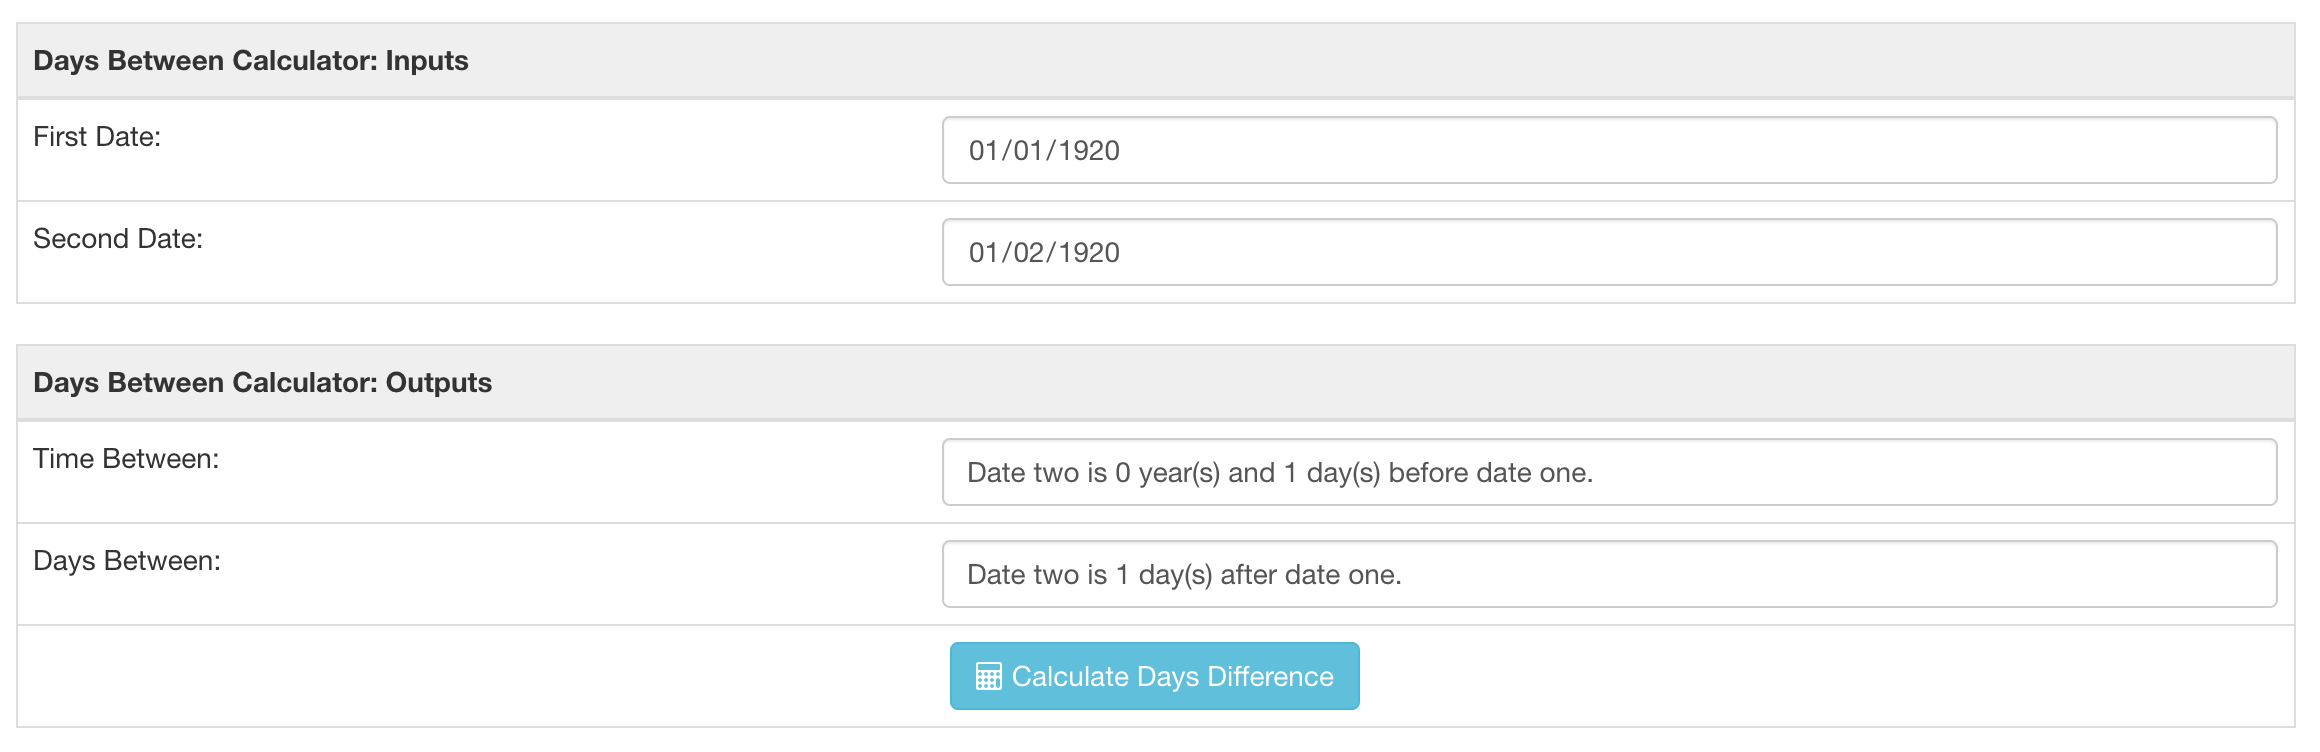 calculate-days-difference-between-two-dates-online-sterimtippost